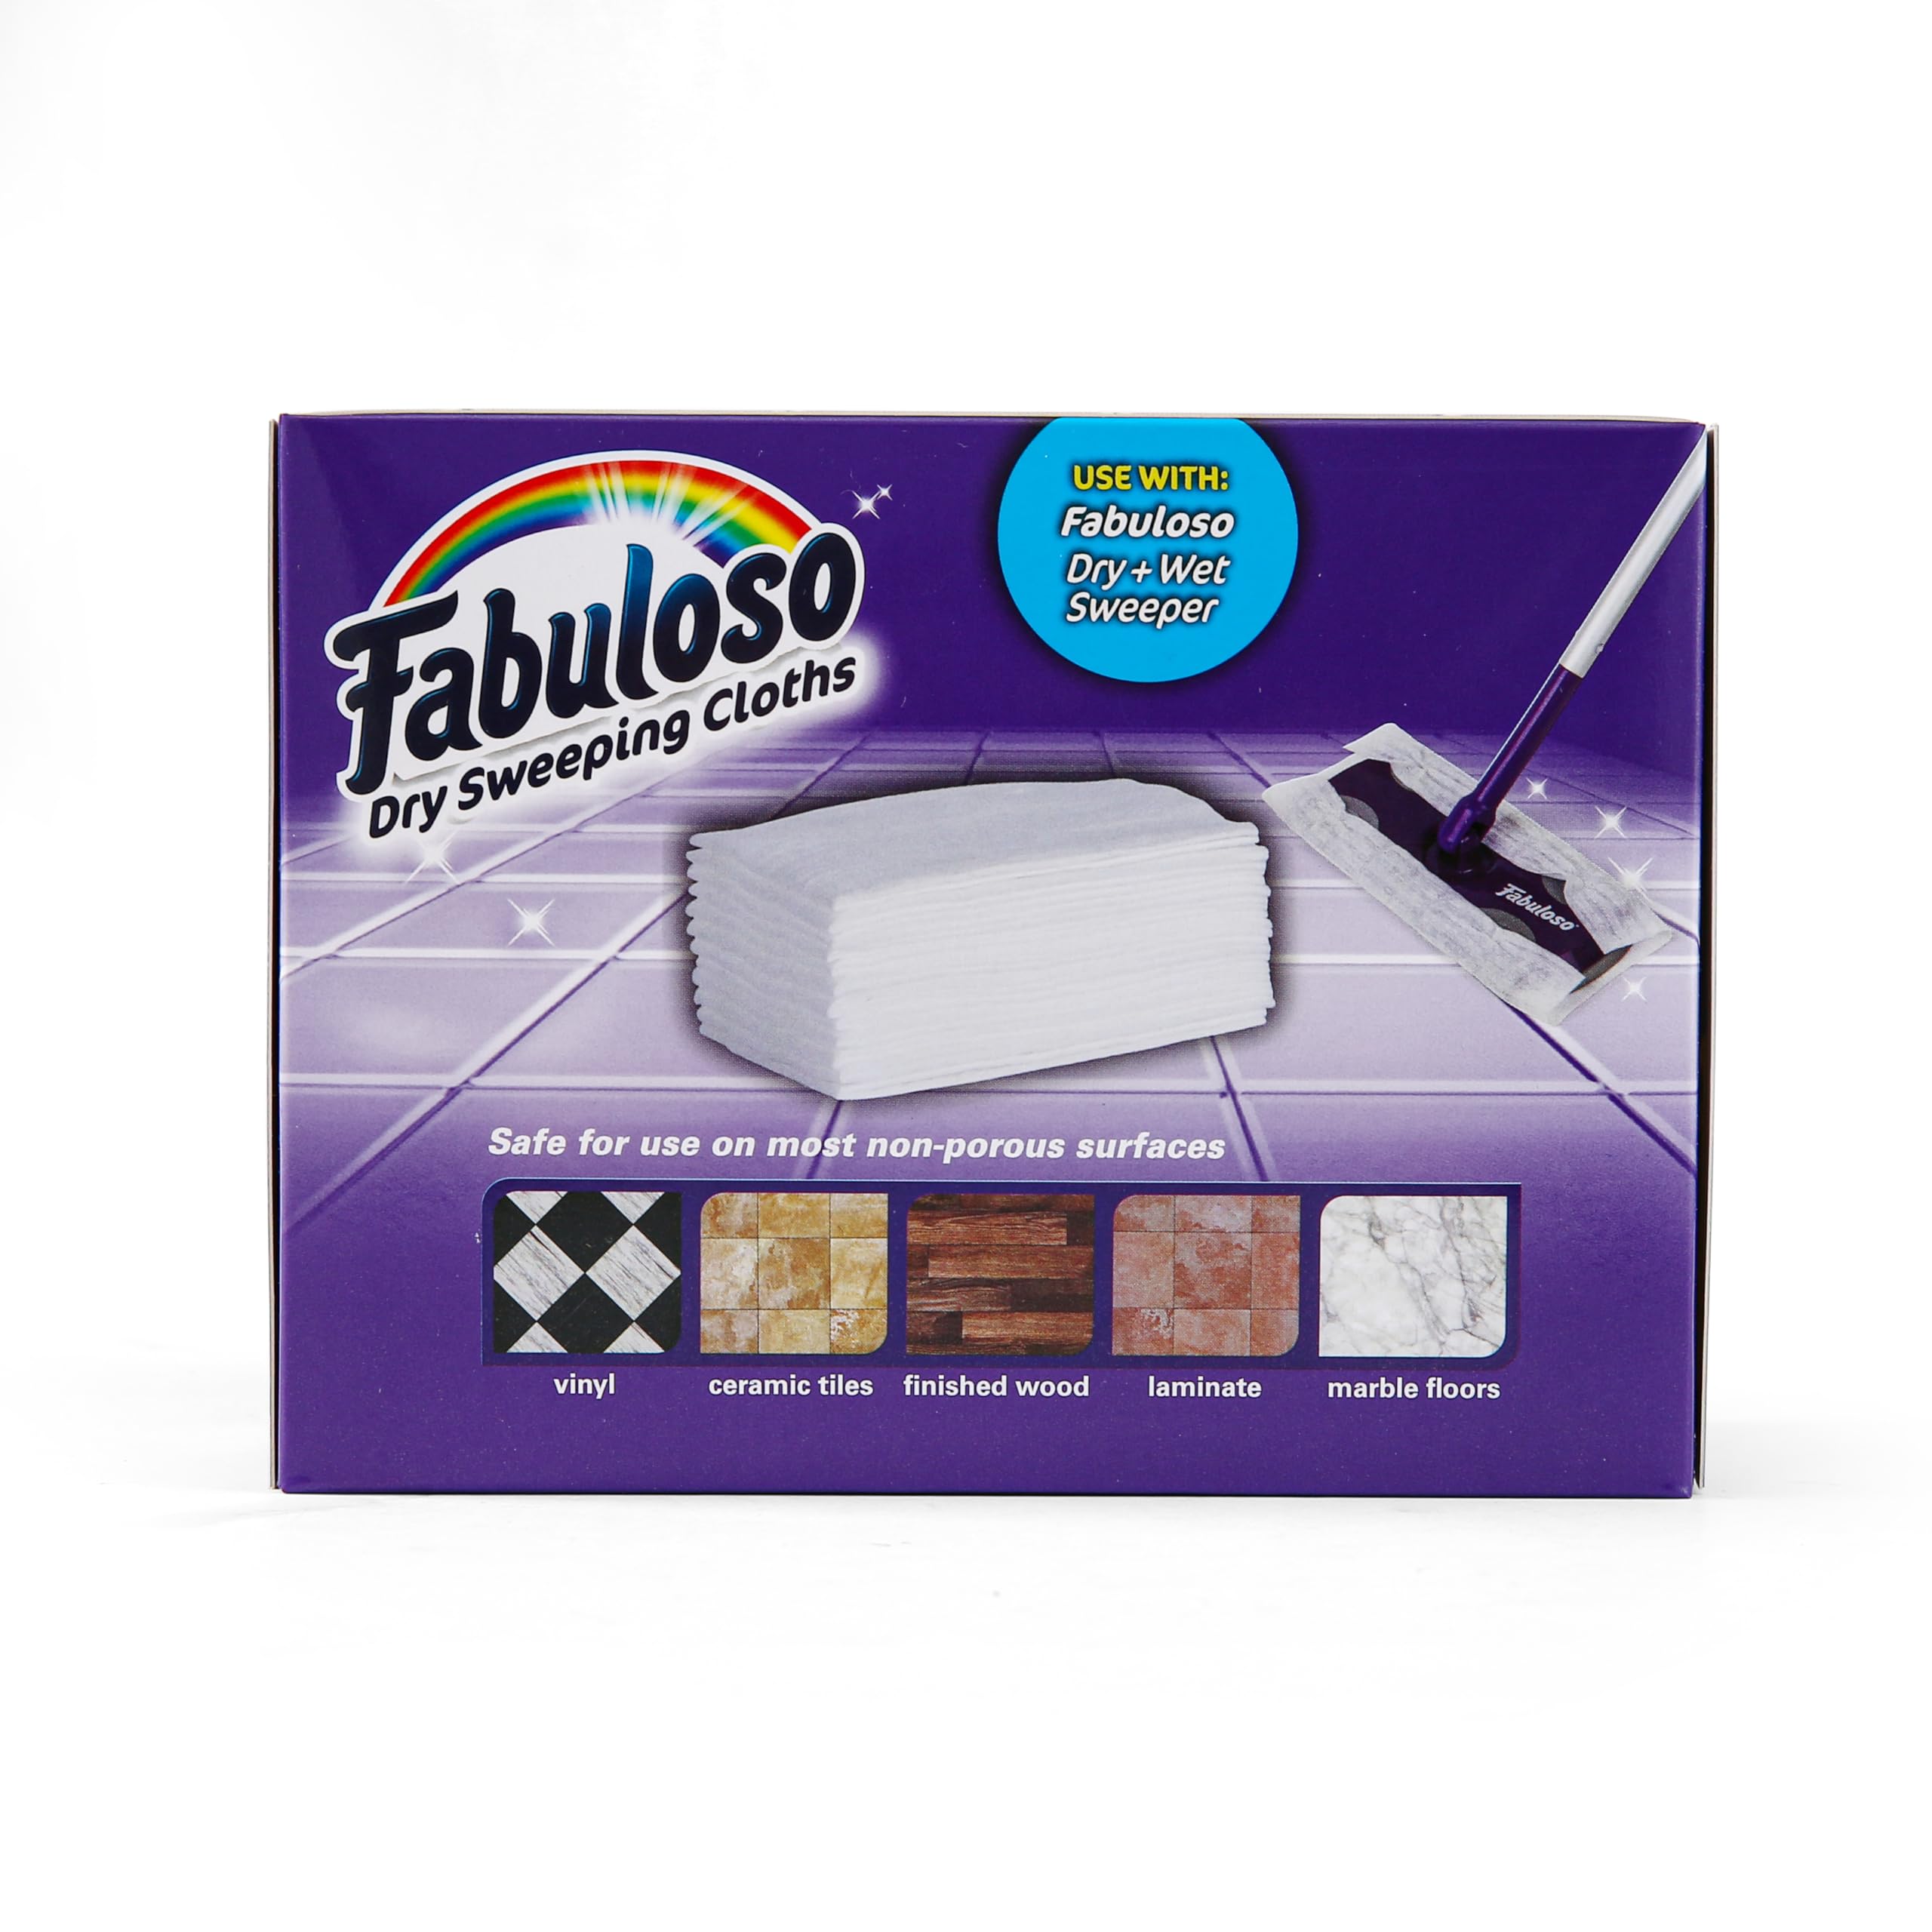 Fabuloso Dry Cloths, 16ct | Dry Sweeping Pads, for Use with Fabuloso Dry + Wet Sweeper for Bold and Bright Cleaning Experience | Clean Your Floors with Ease